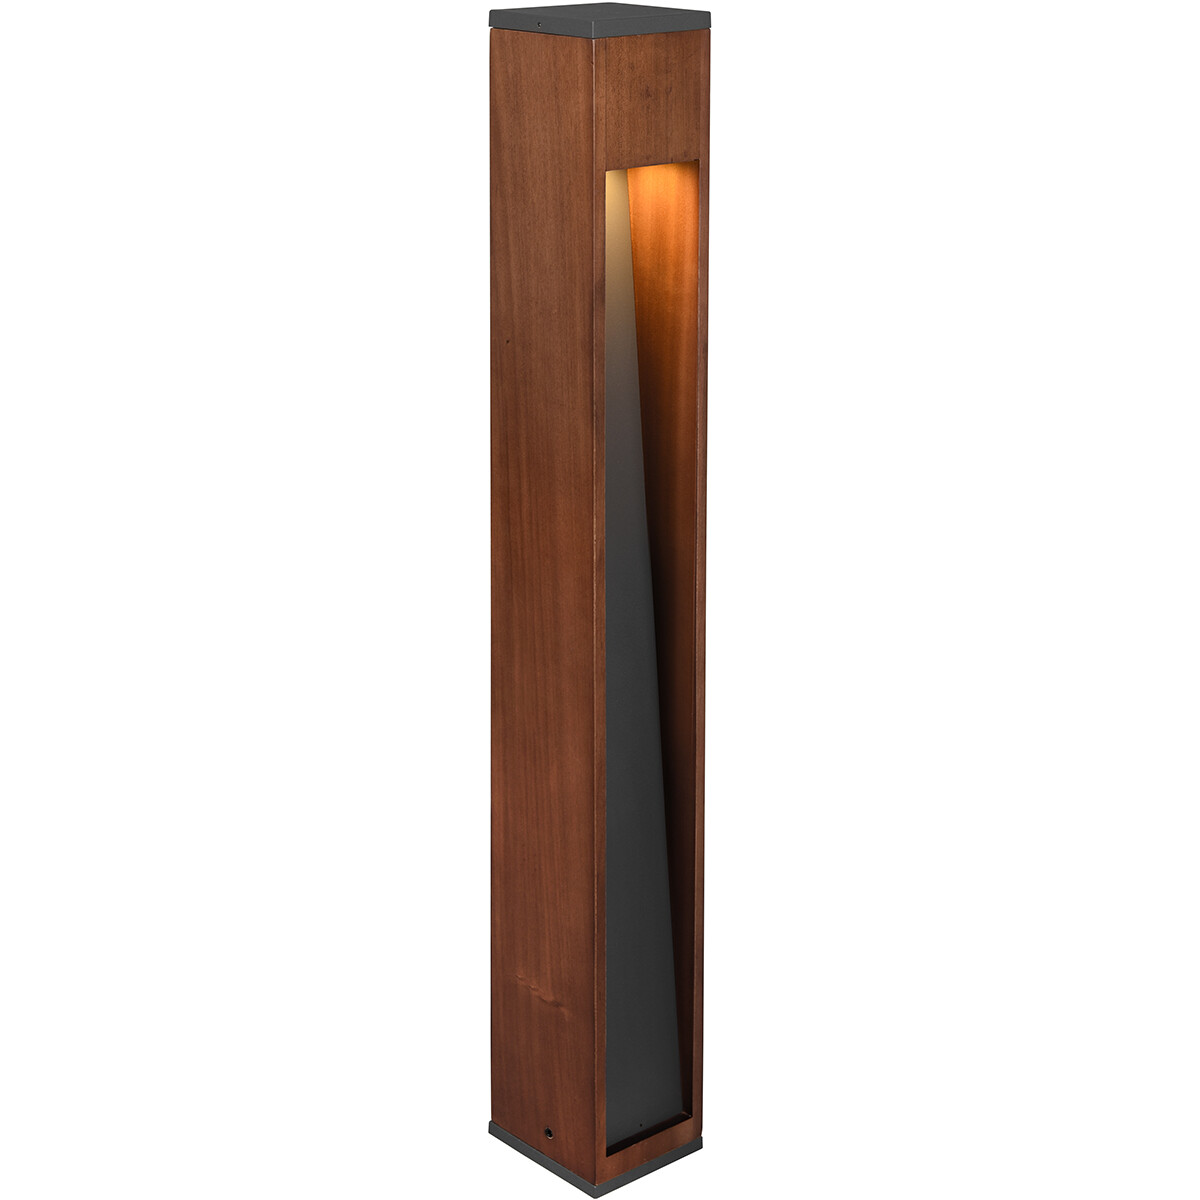 LED Tuinverlichting - Staande Buitenlamp - Trion Enico XL - GU10 Fitting - Rechthoek - Hout - Natuur Hout product afbeelding